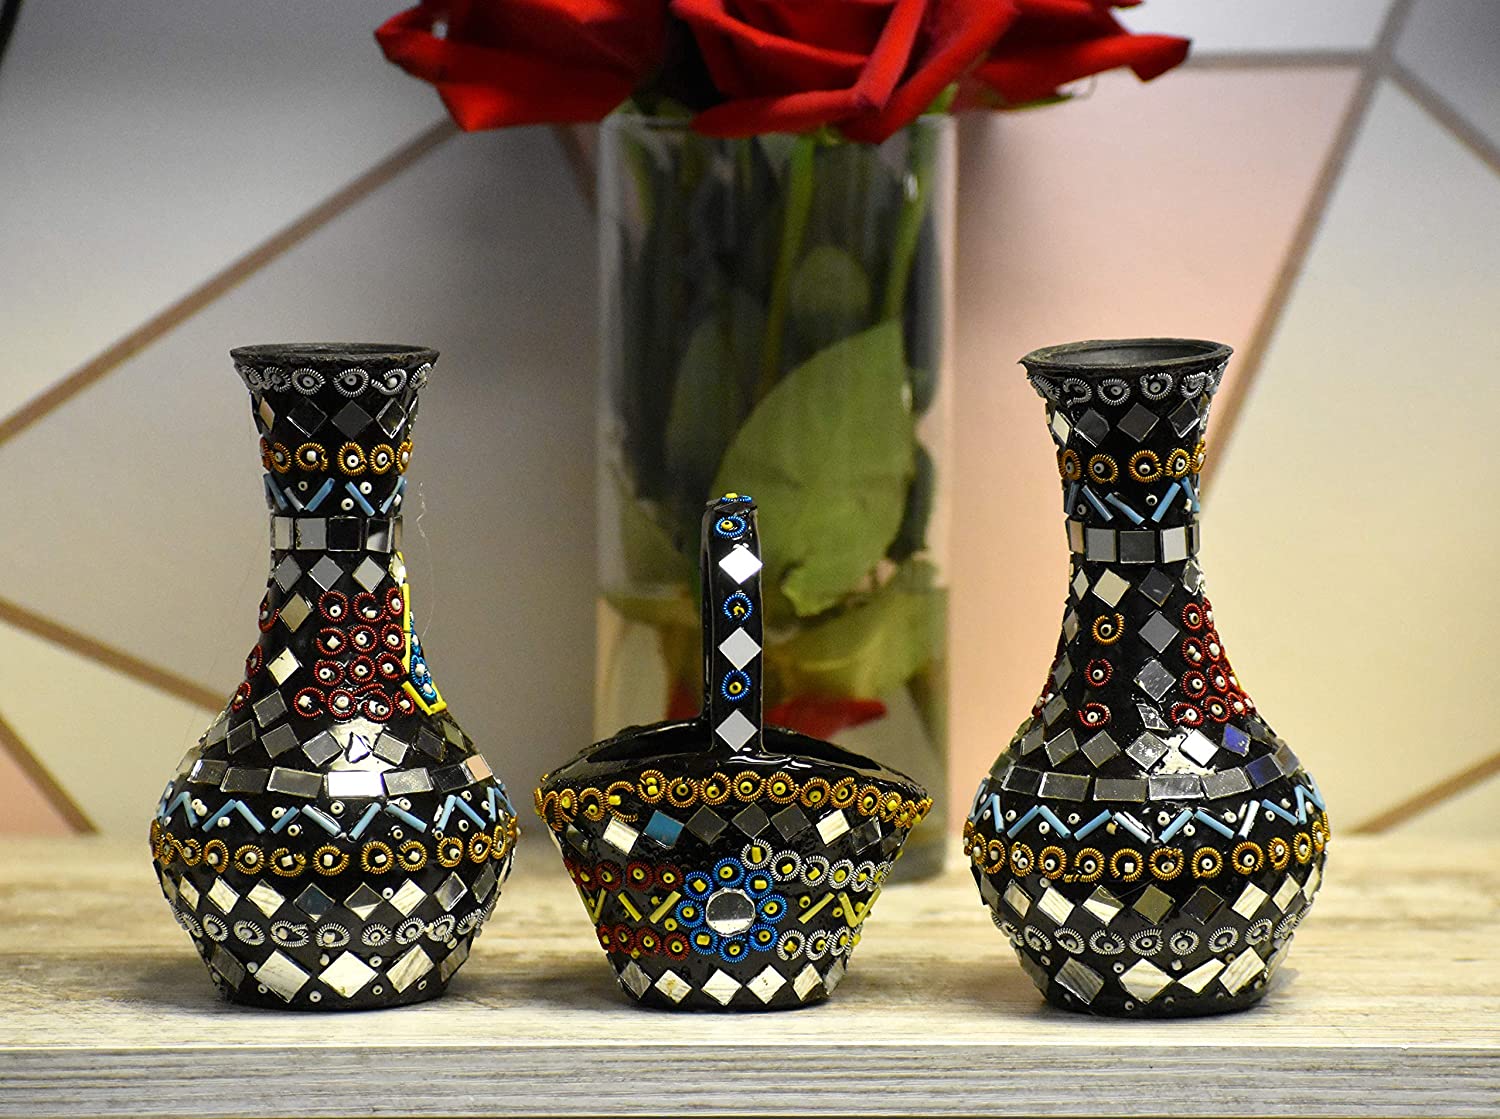 Vase with Basket Decorative Piece For Table Top Shisha Moti Craft Mirror Work [4 inches]